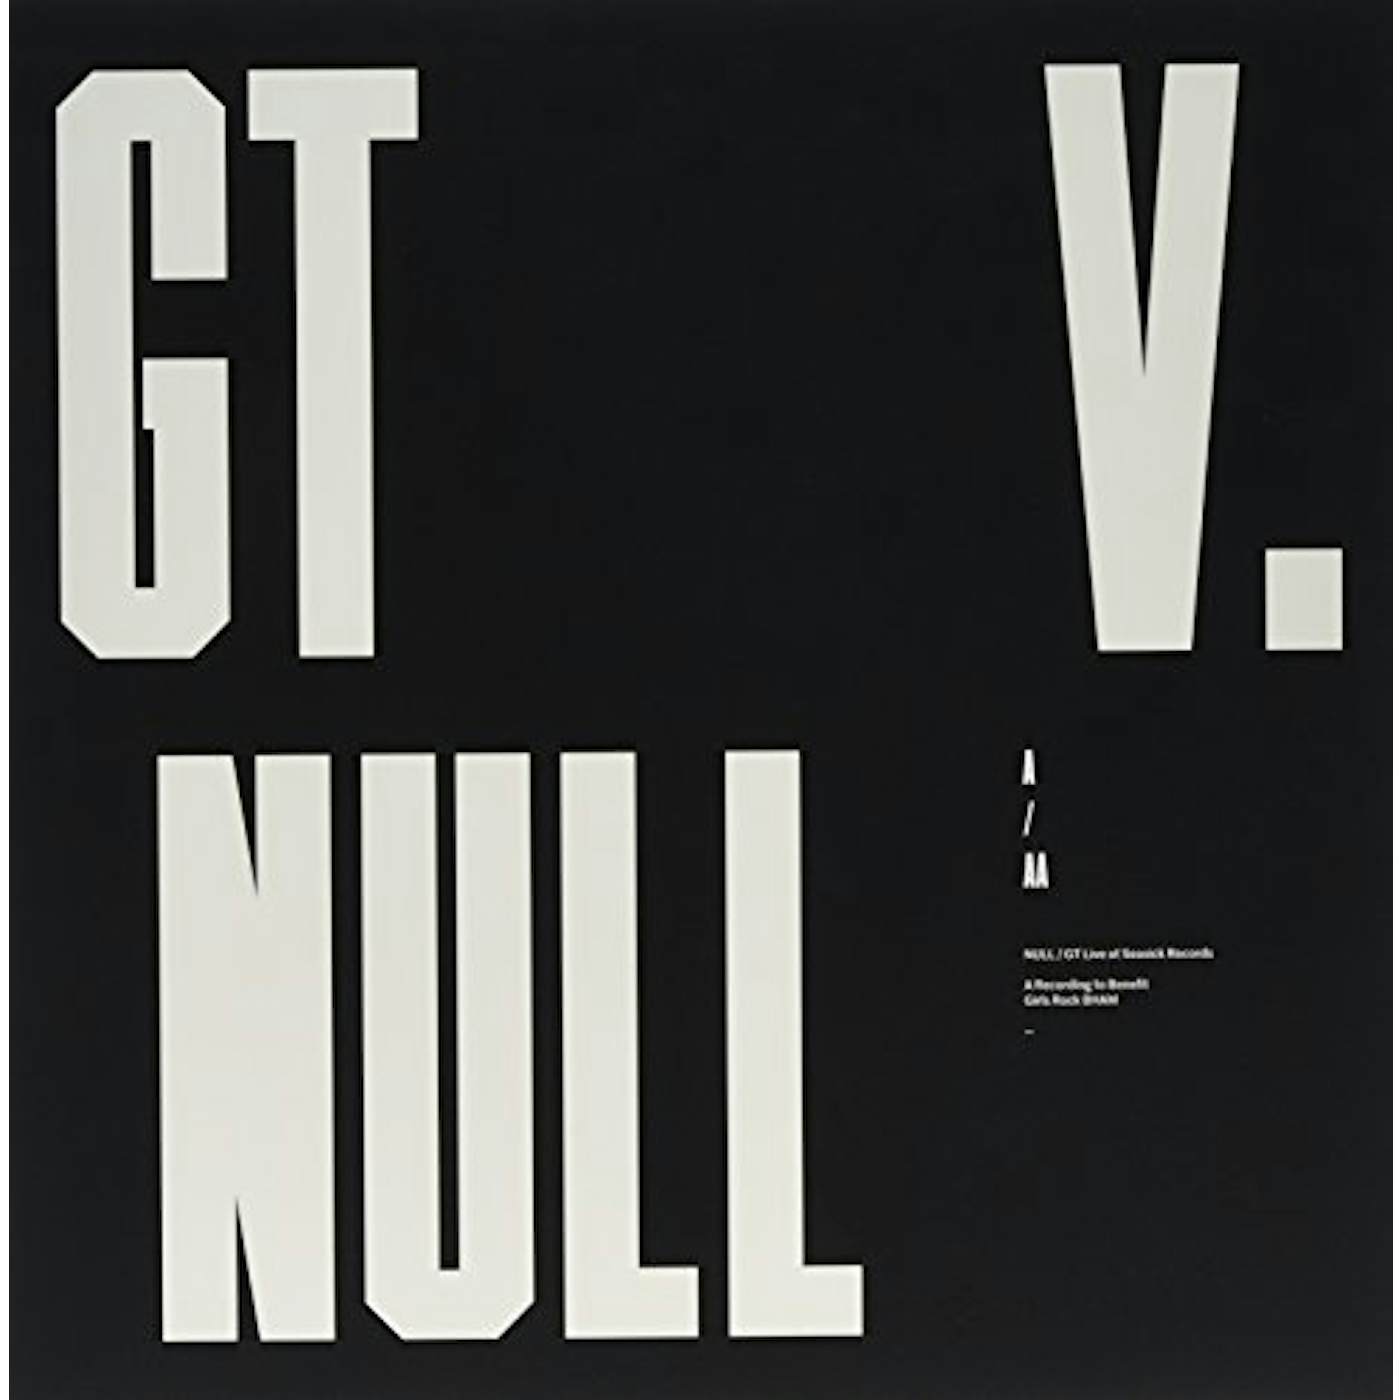 Null / Gt LIVE AT SEASICK RECORDS Vinyl Record